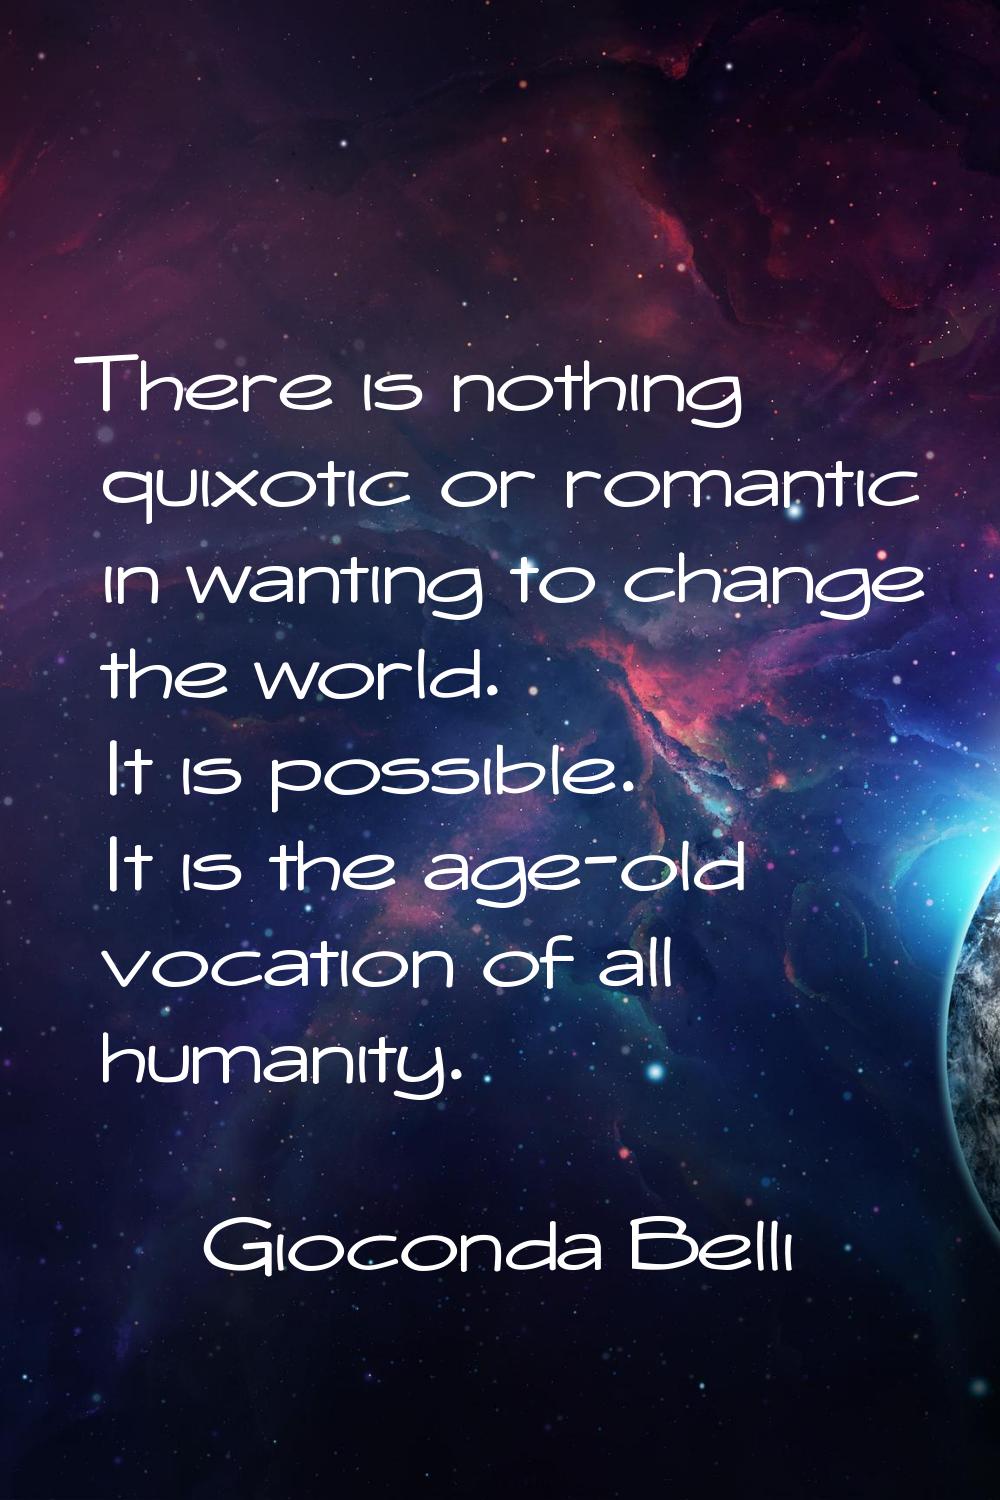 There is nothing quixotic or romantic in wanting to change the world. It is possible. It is the age